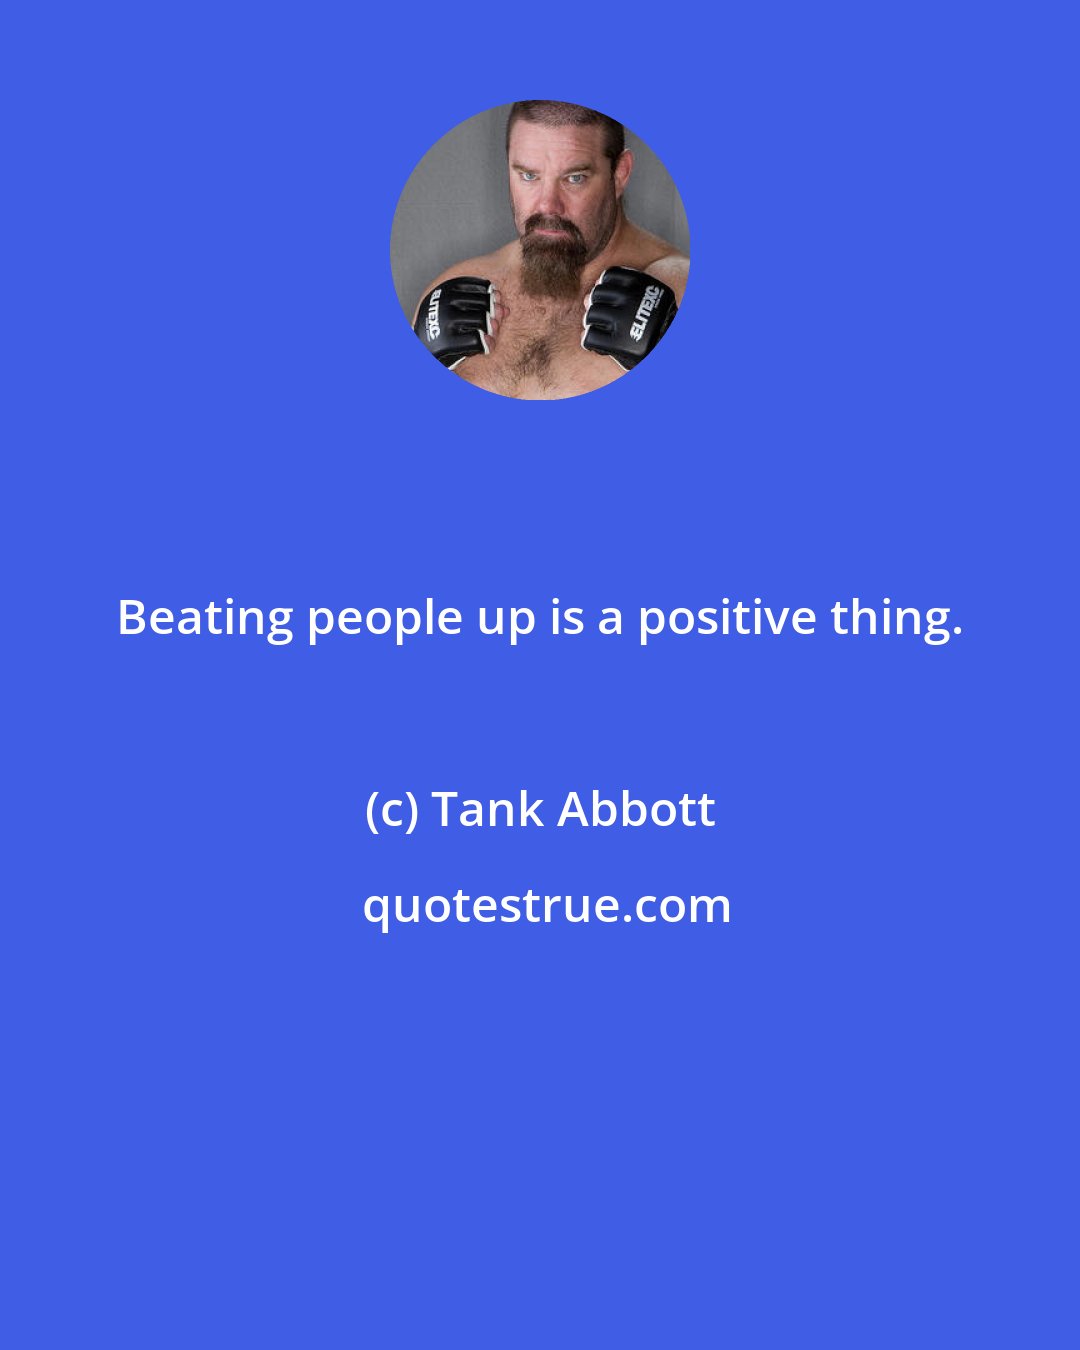 Tank Abbott: Beating people up is a positive thing.